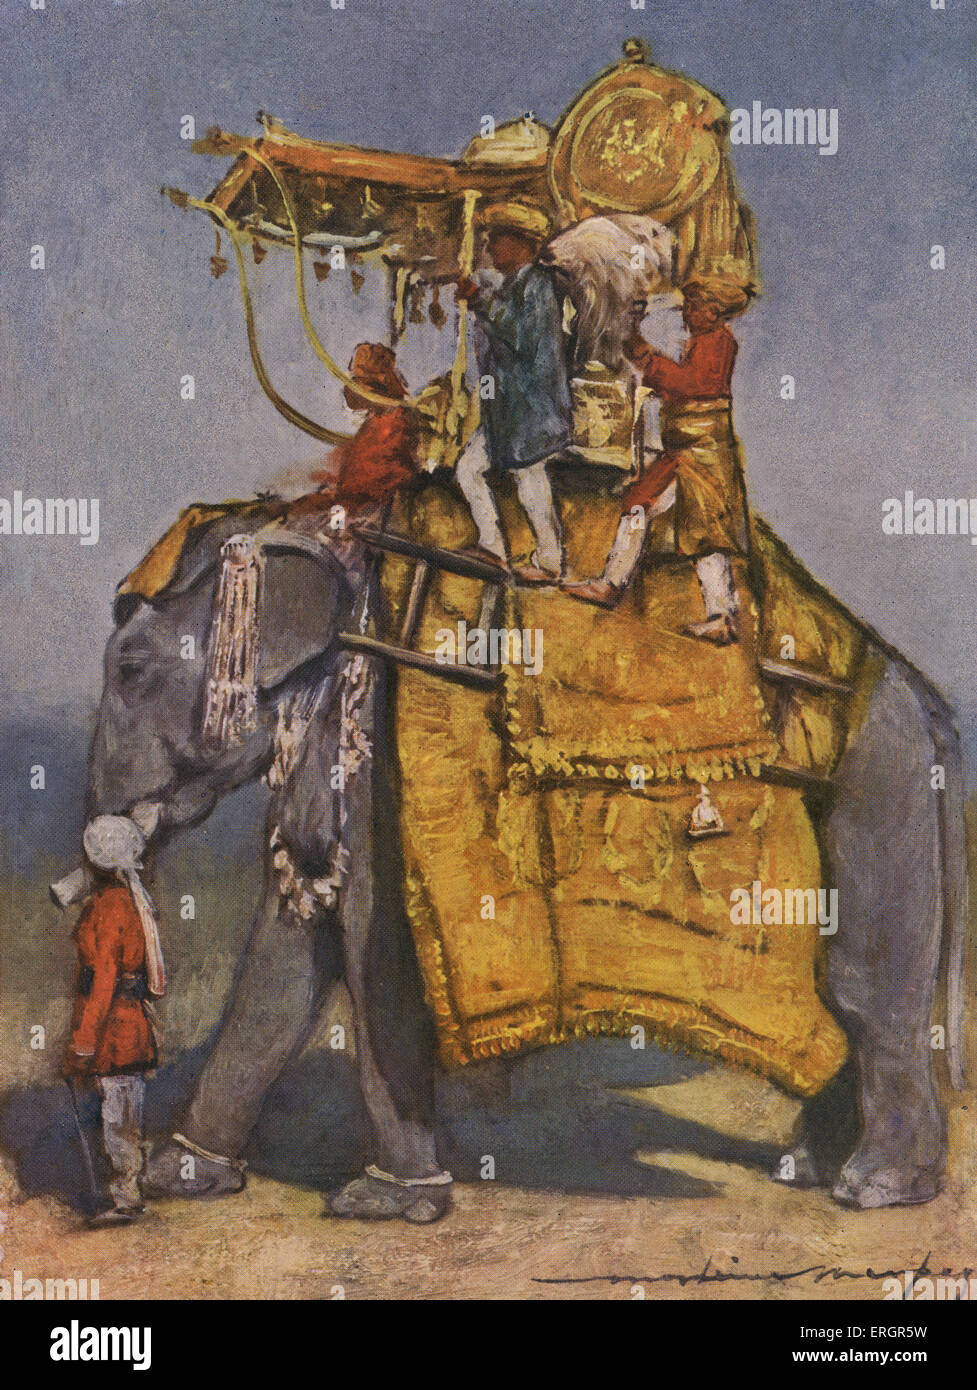 Indian state elephant -  three men riding an elephant adorned with a decorative headpiece.(Australian artist Mortimer Menpes Stock Photo